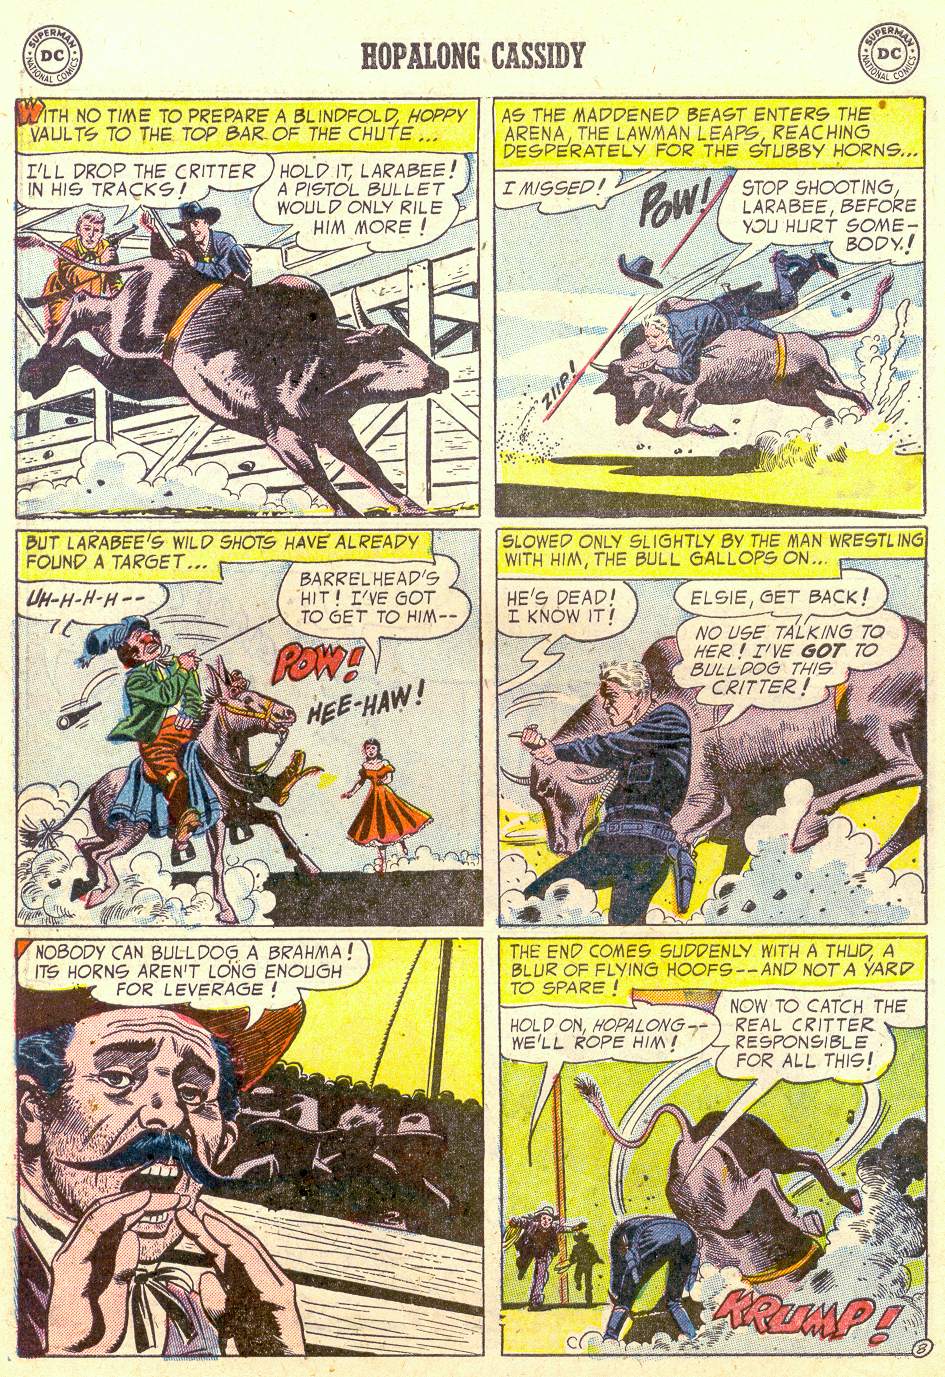 Read online Hopalong Cassidy comic -  Issue #90 - 10